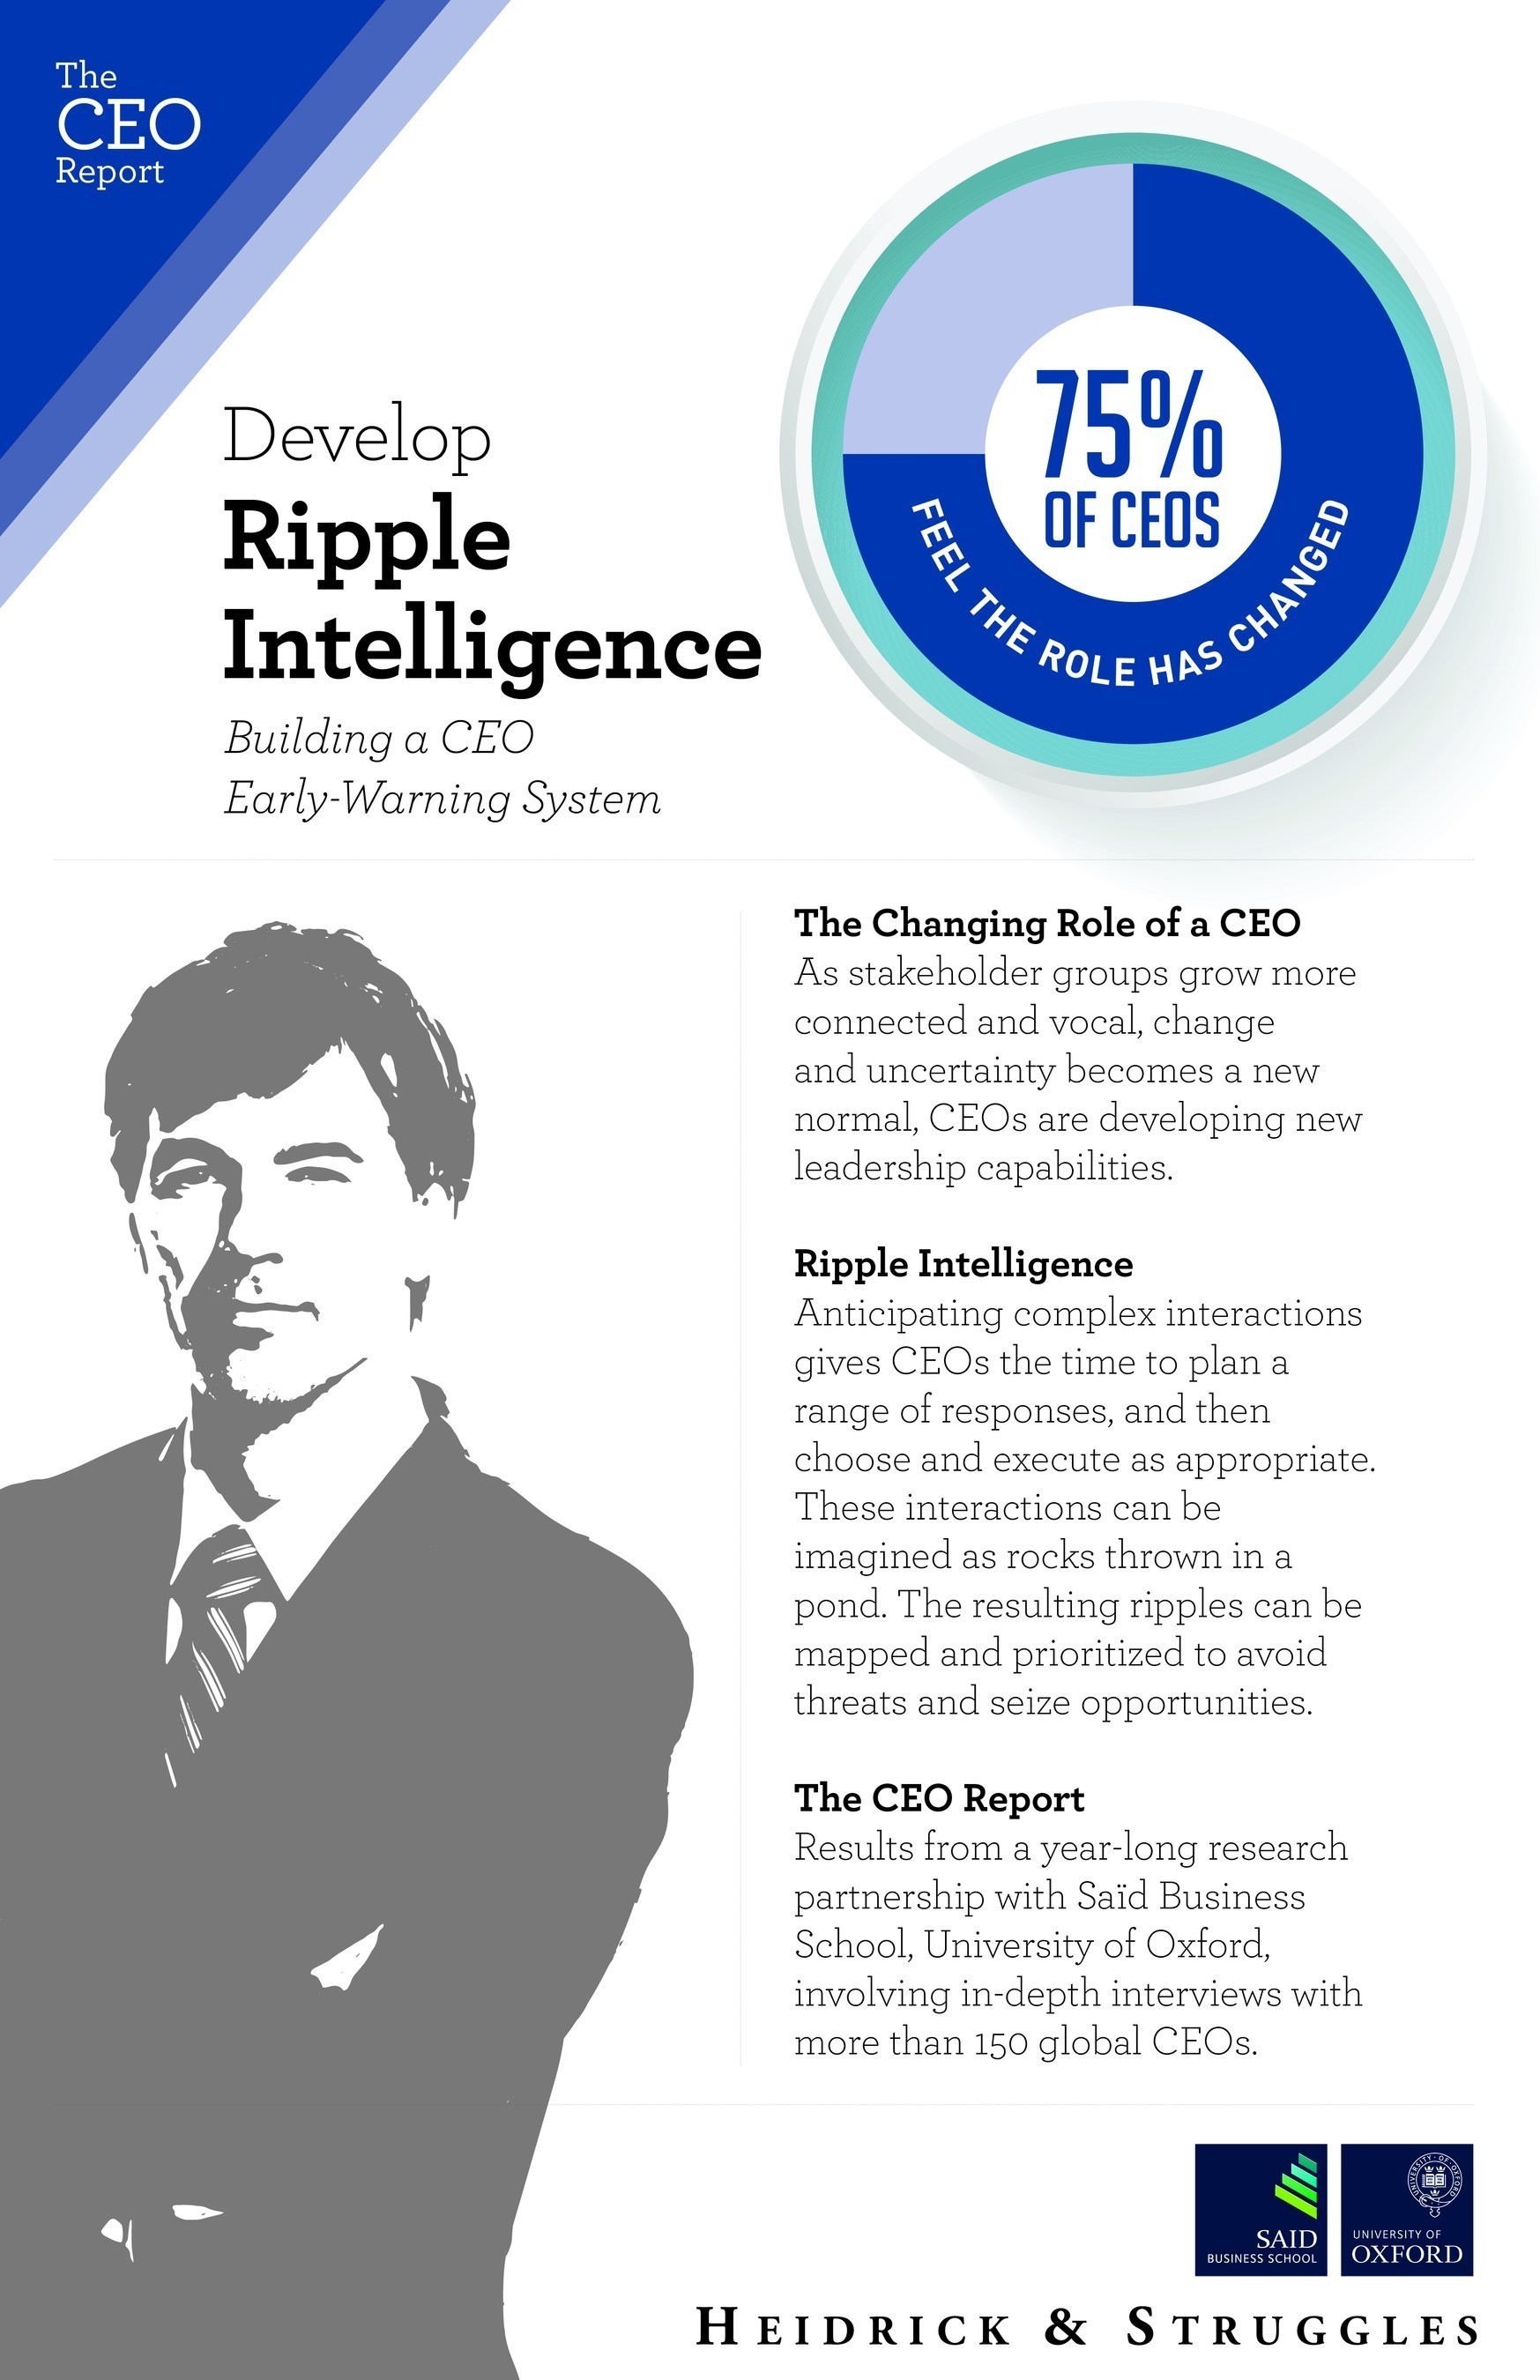 The CEO Report - Ripple Intelligence Infographic